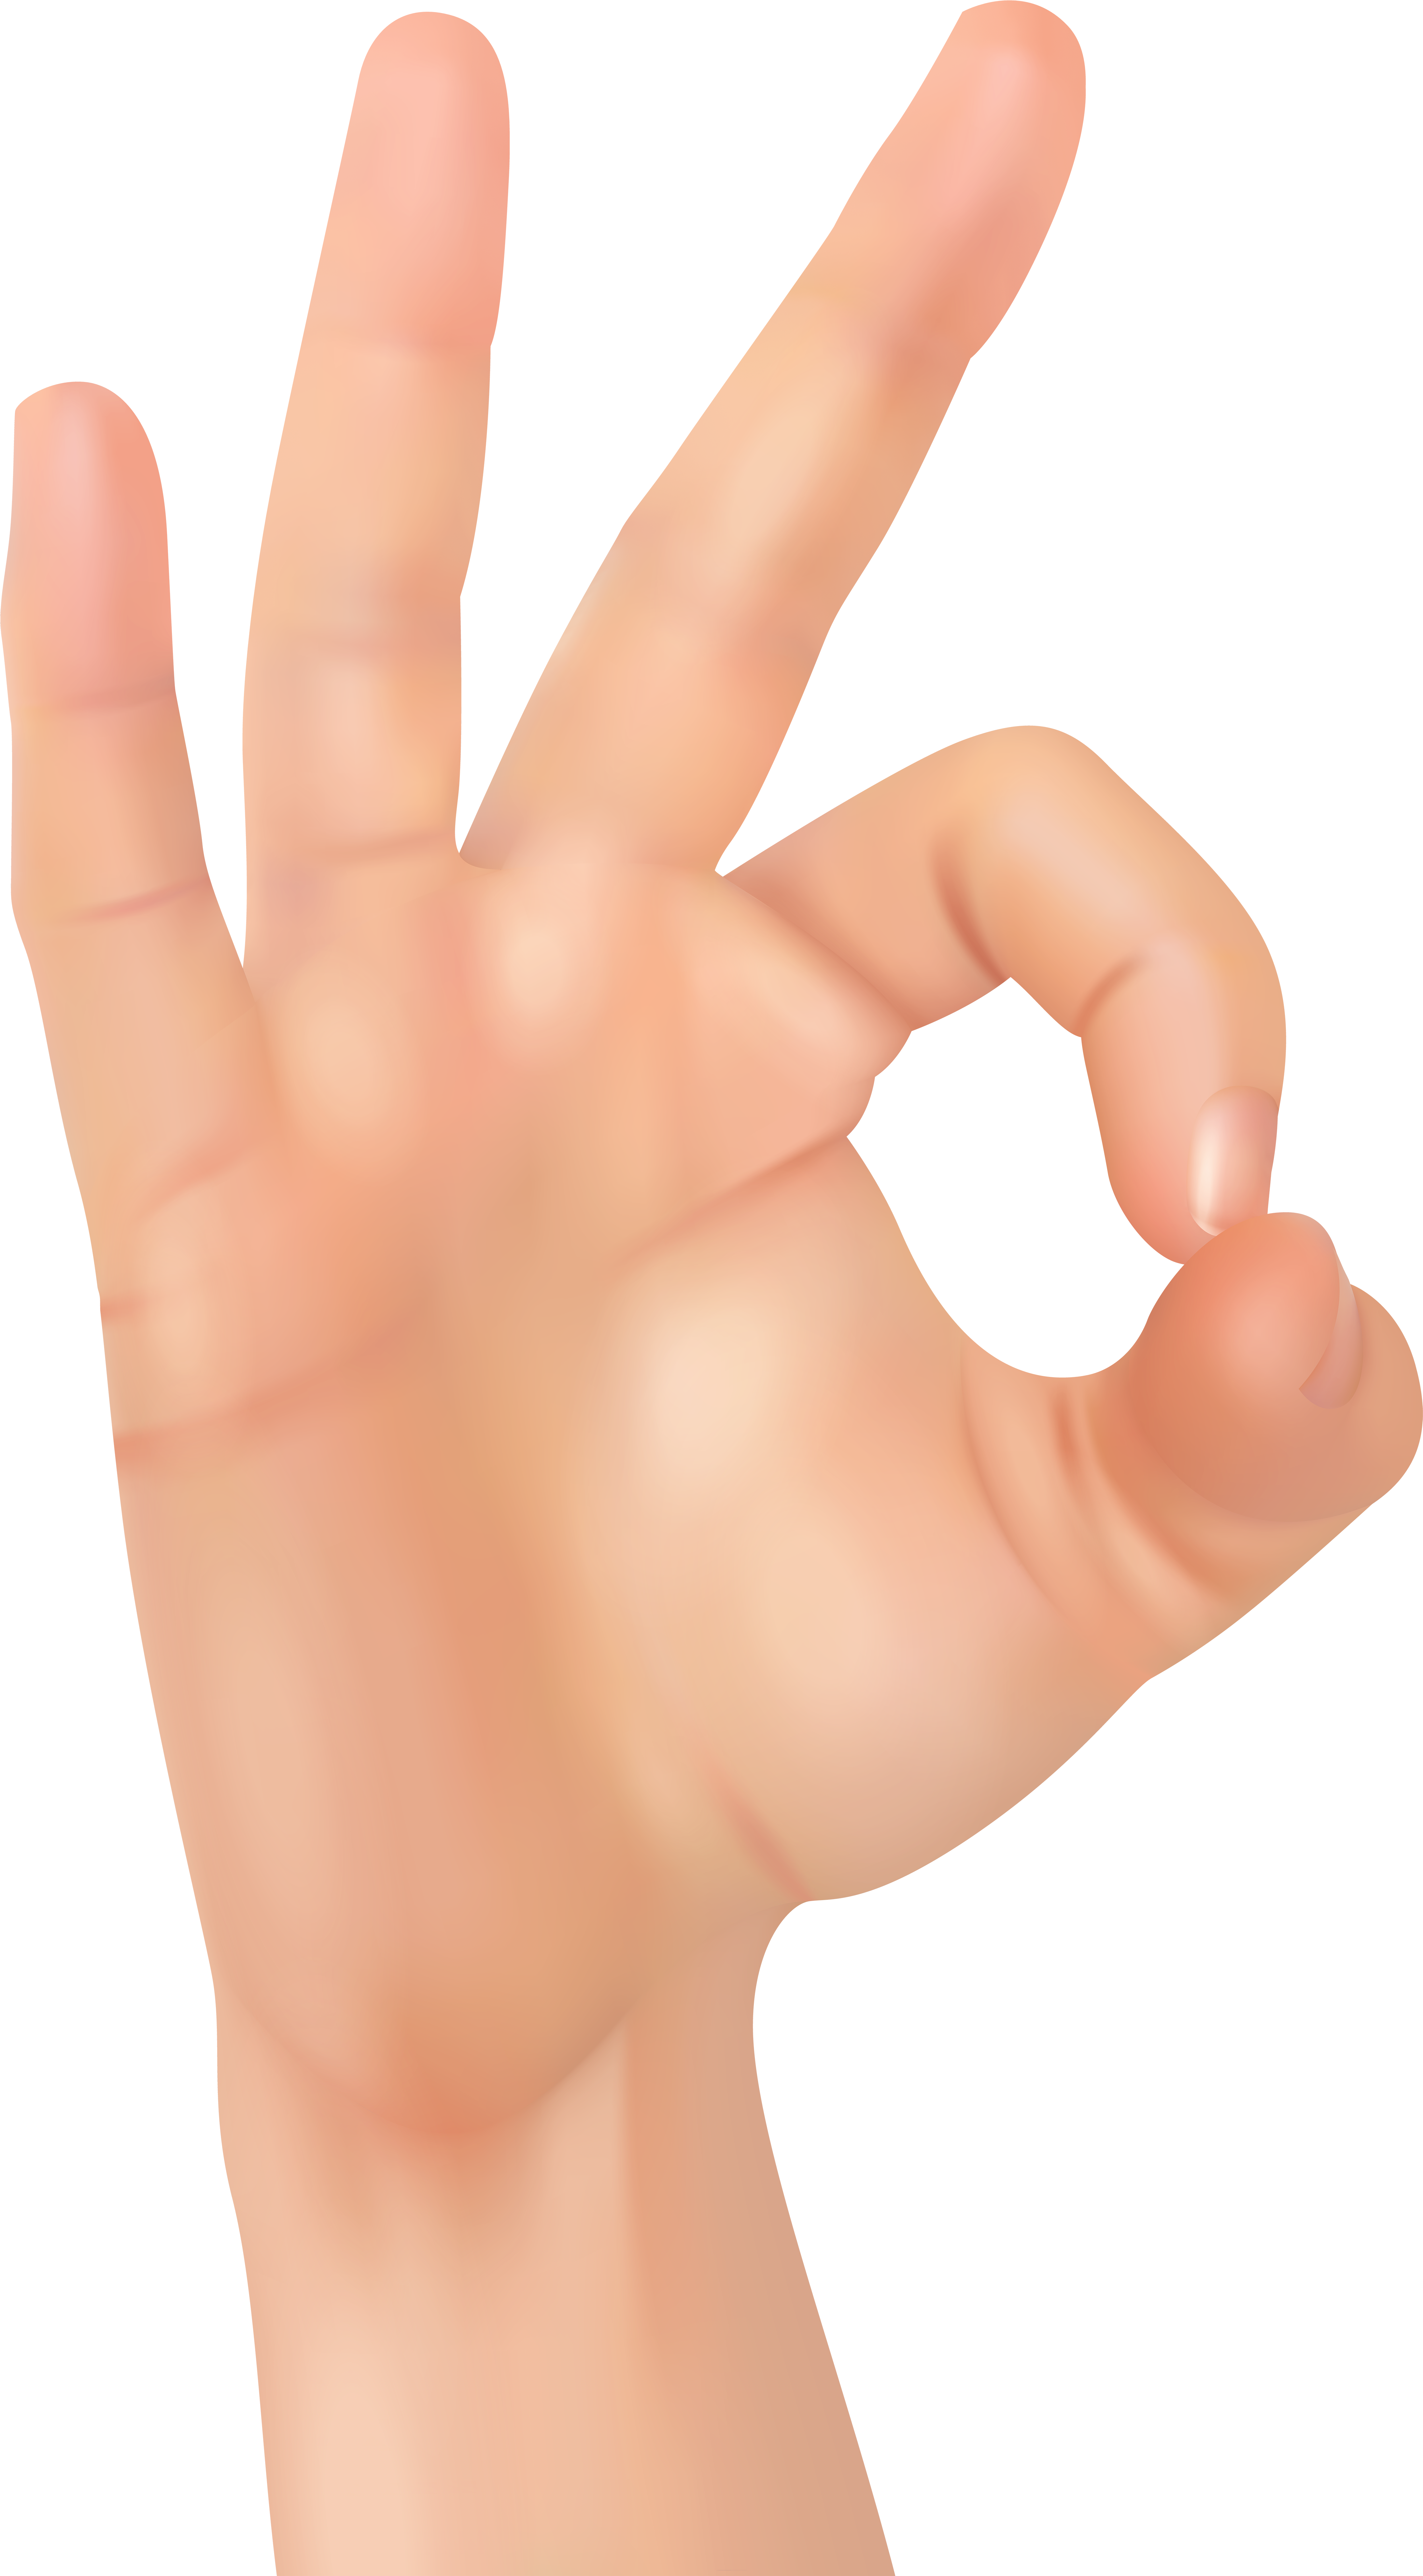 Download Okay Hand Png Clip Art Image Okay Hand Png Png Image With No Background Pngkey Com